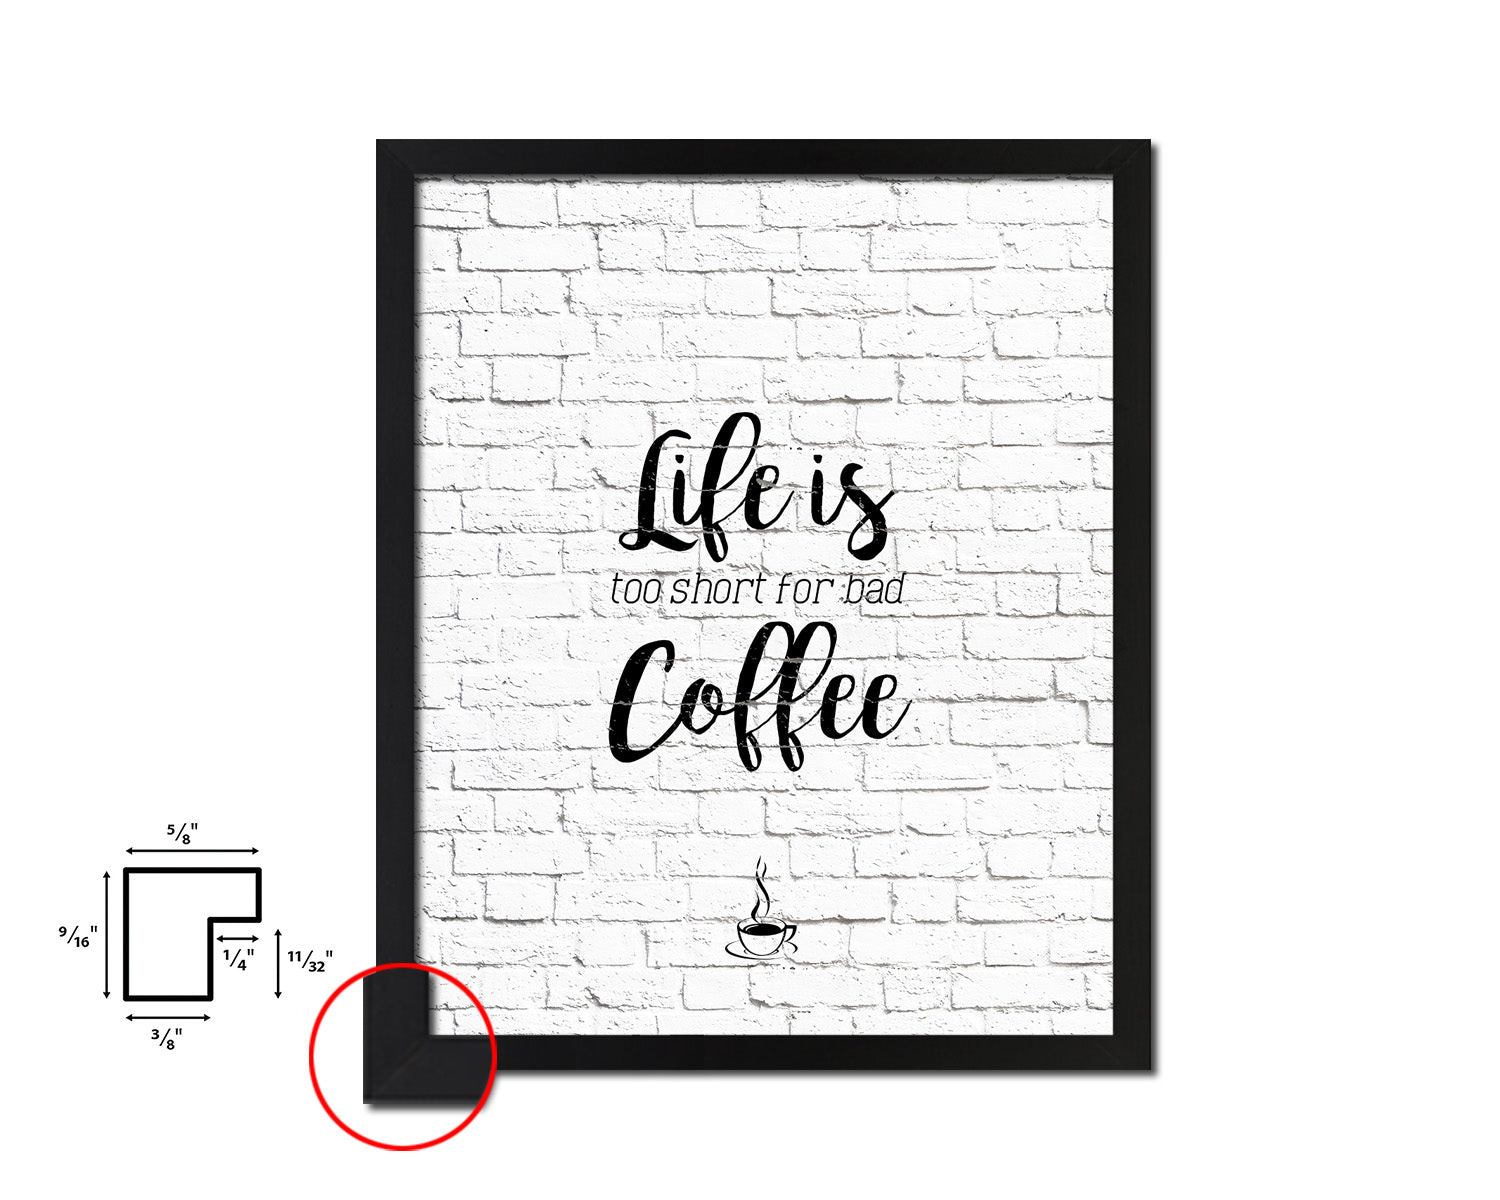 Life is what happens between coffee&wine Quote Framed Artwork Print Wall Decor Art Gifts